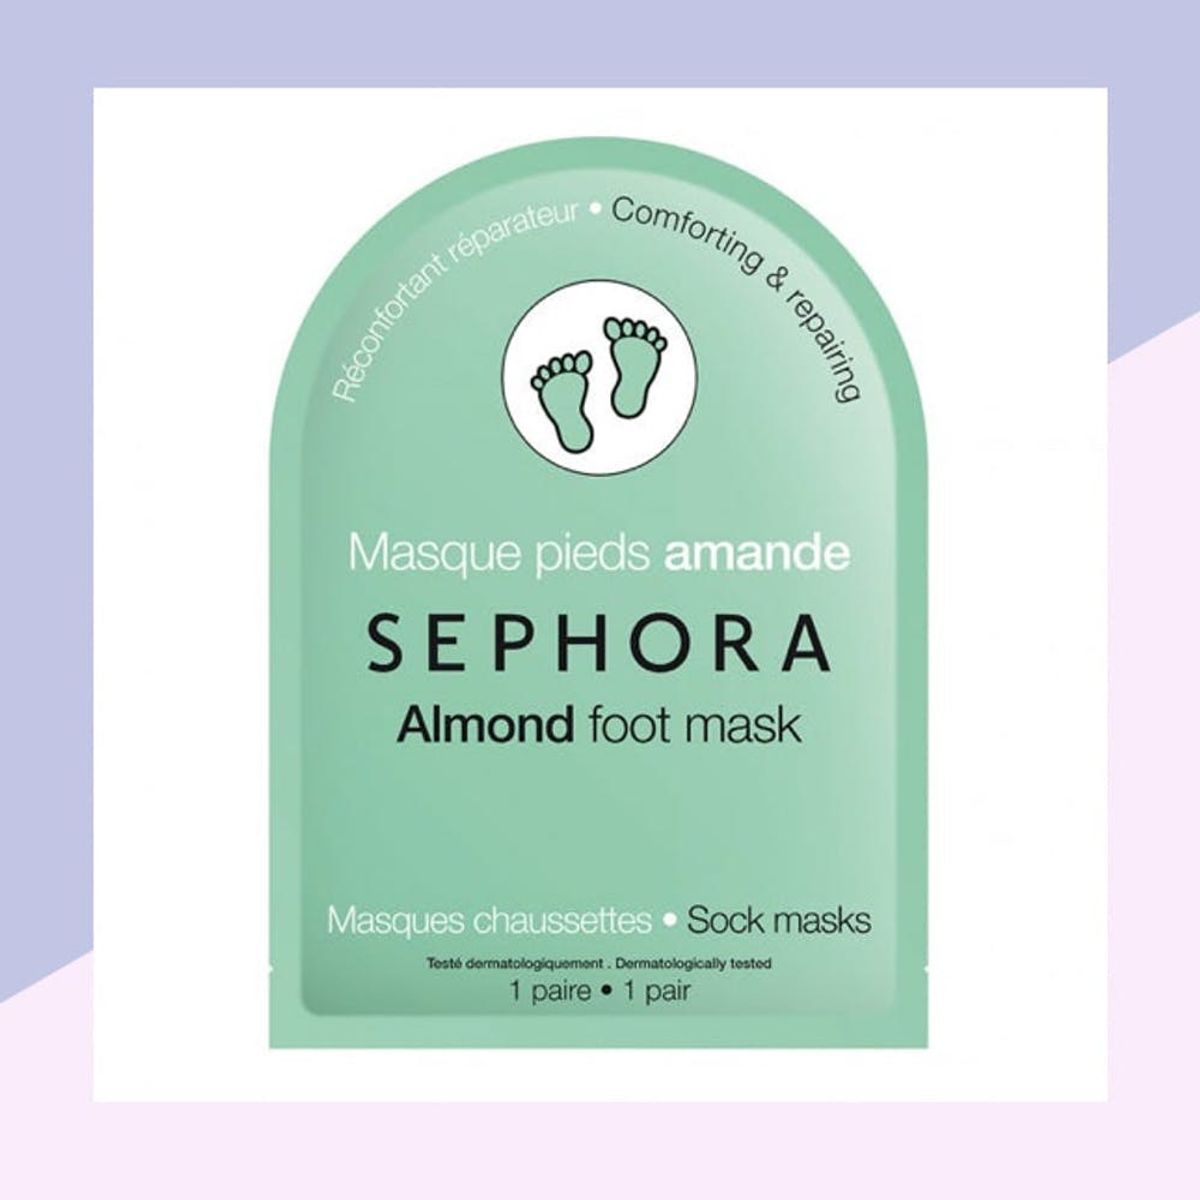 6 Sheet Masks for Every Part of Your Body